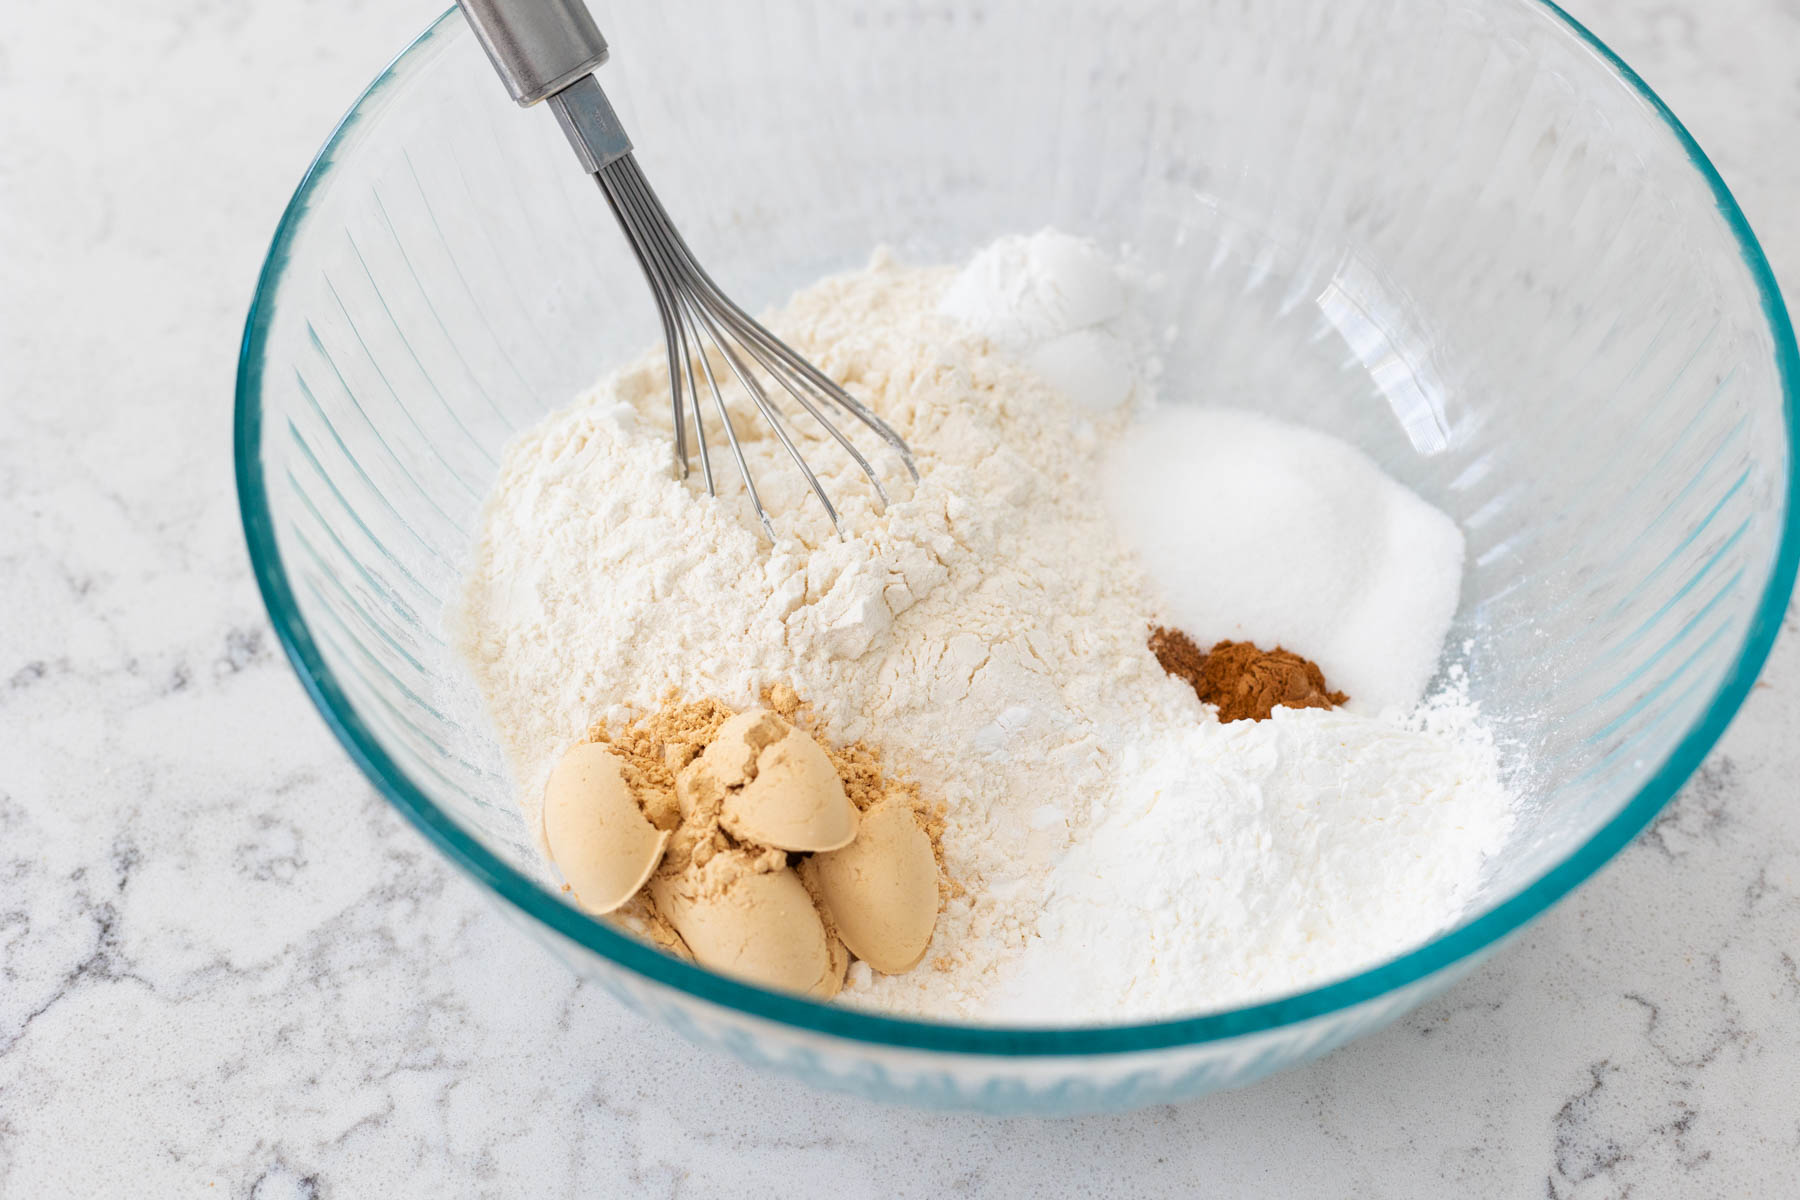 The flour, sugar, and peanut butter powder are in a large mixing bowl.